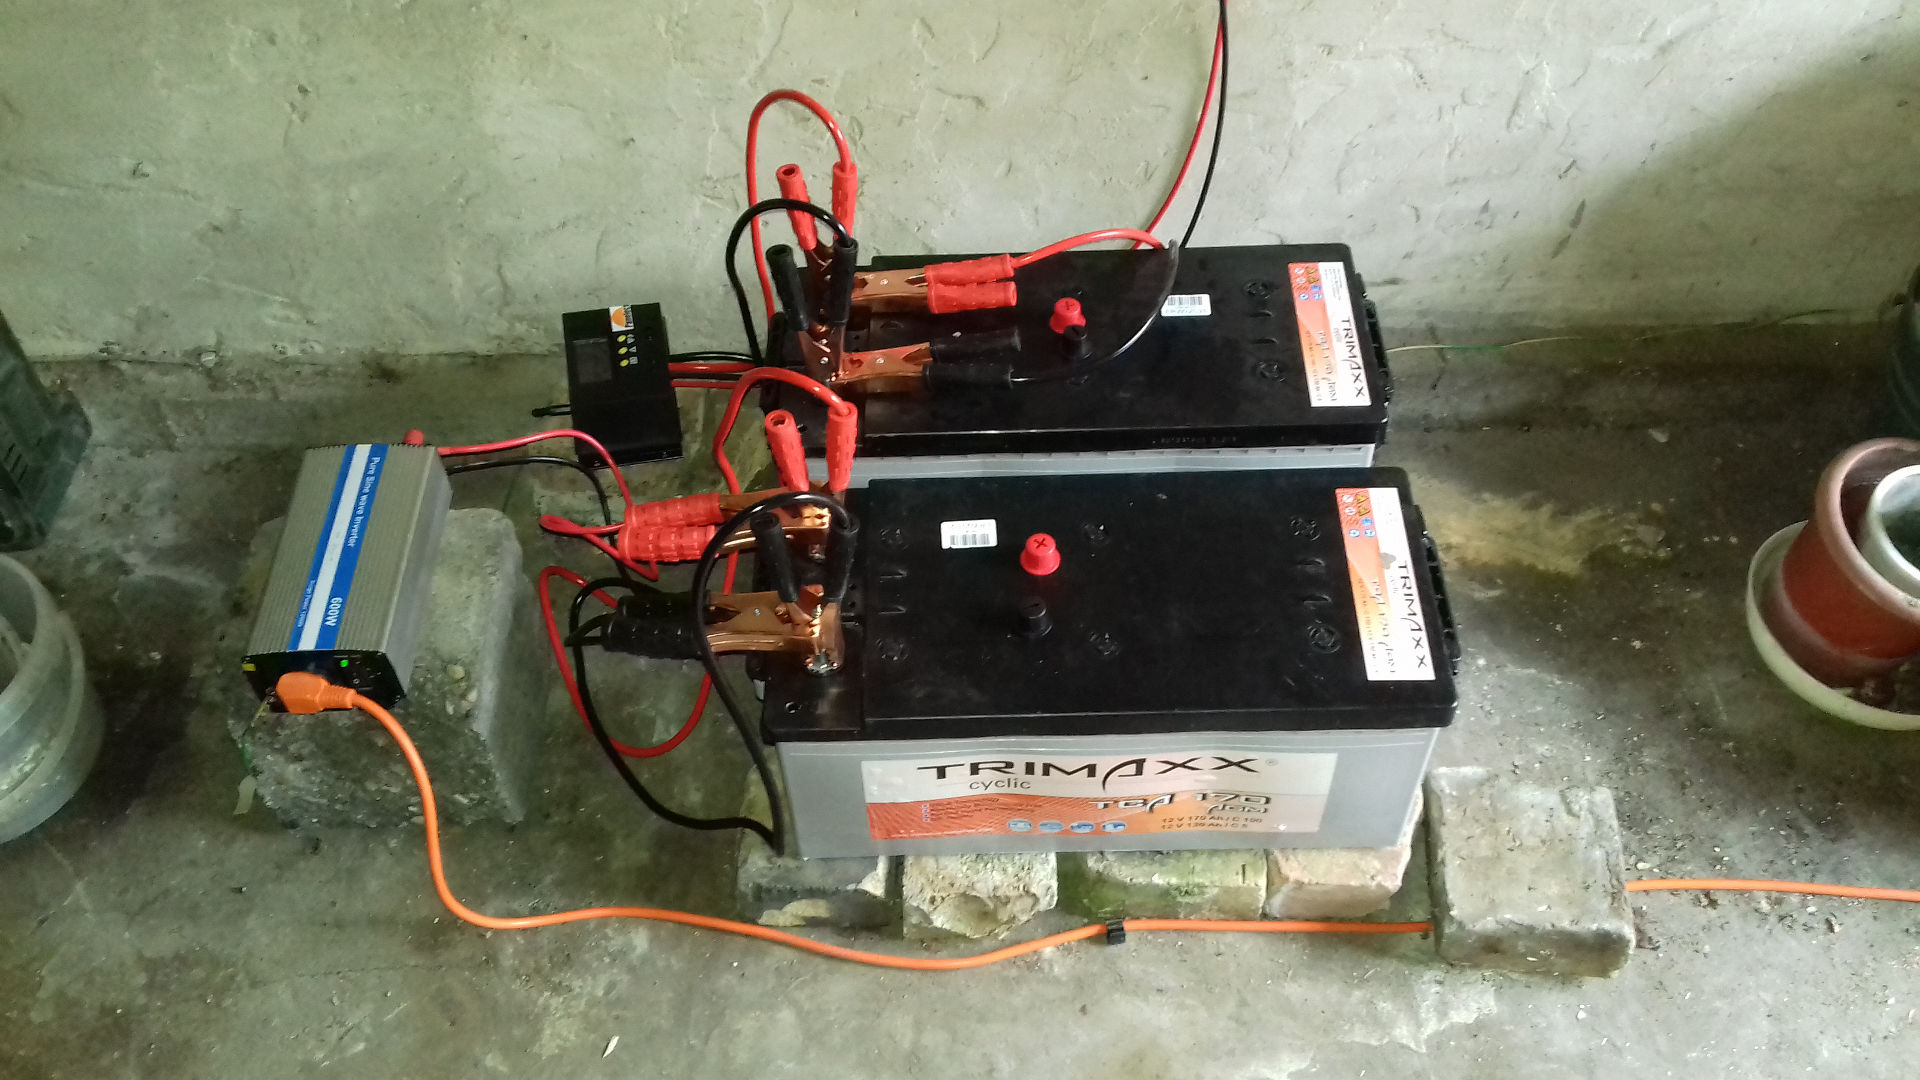 Inverter, charge controller, batteries and cables